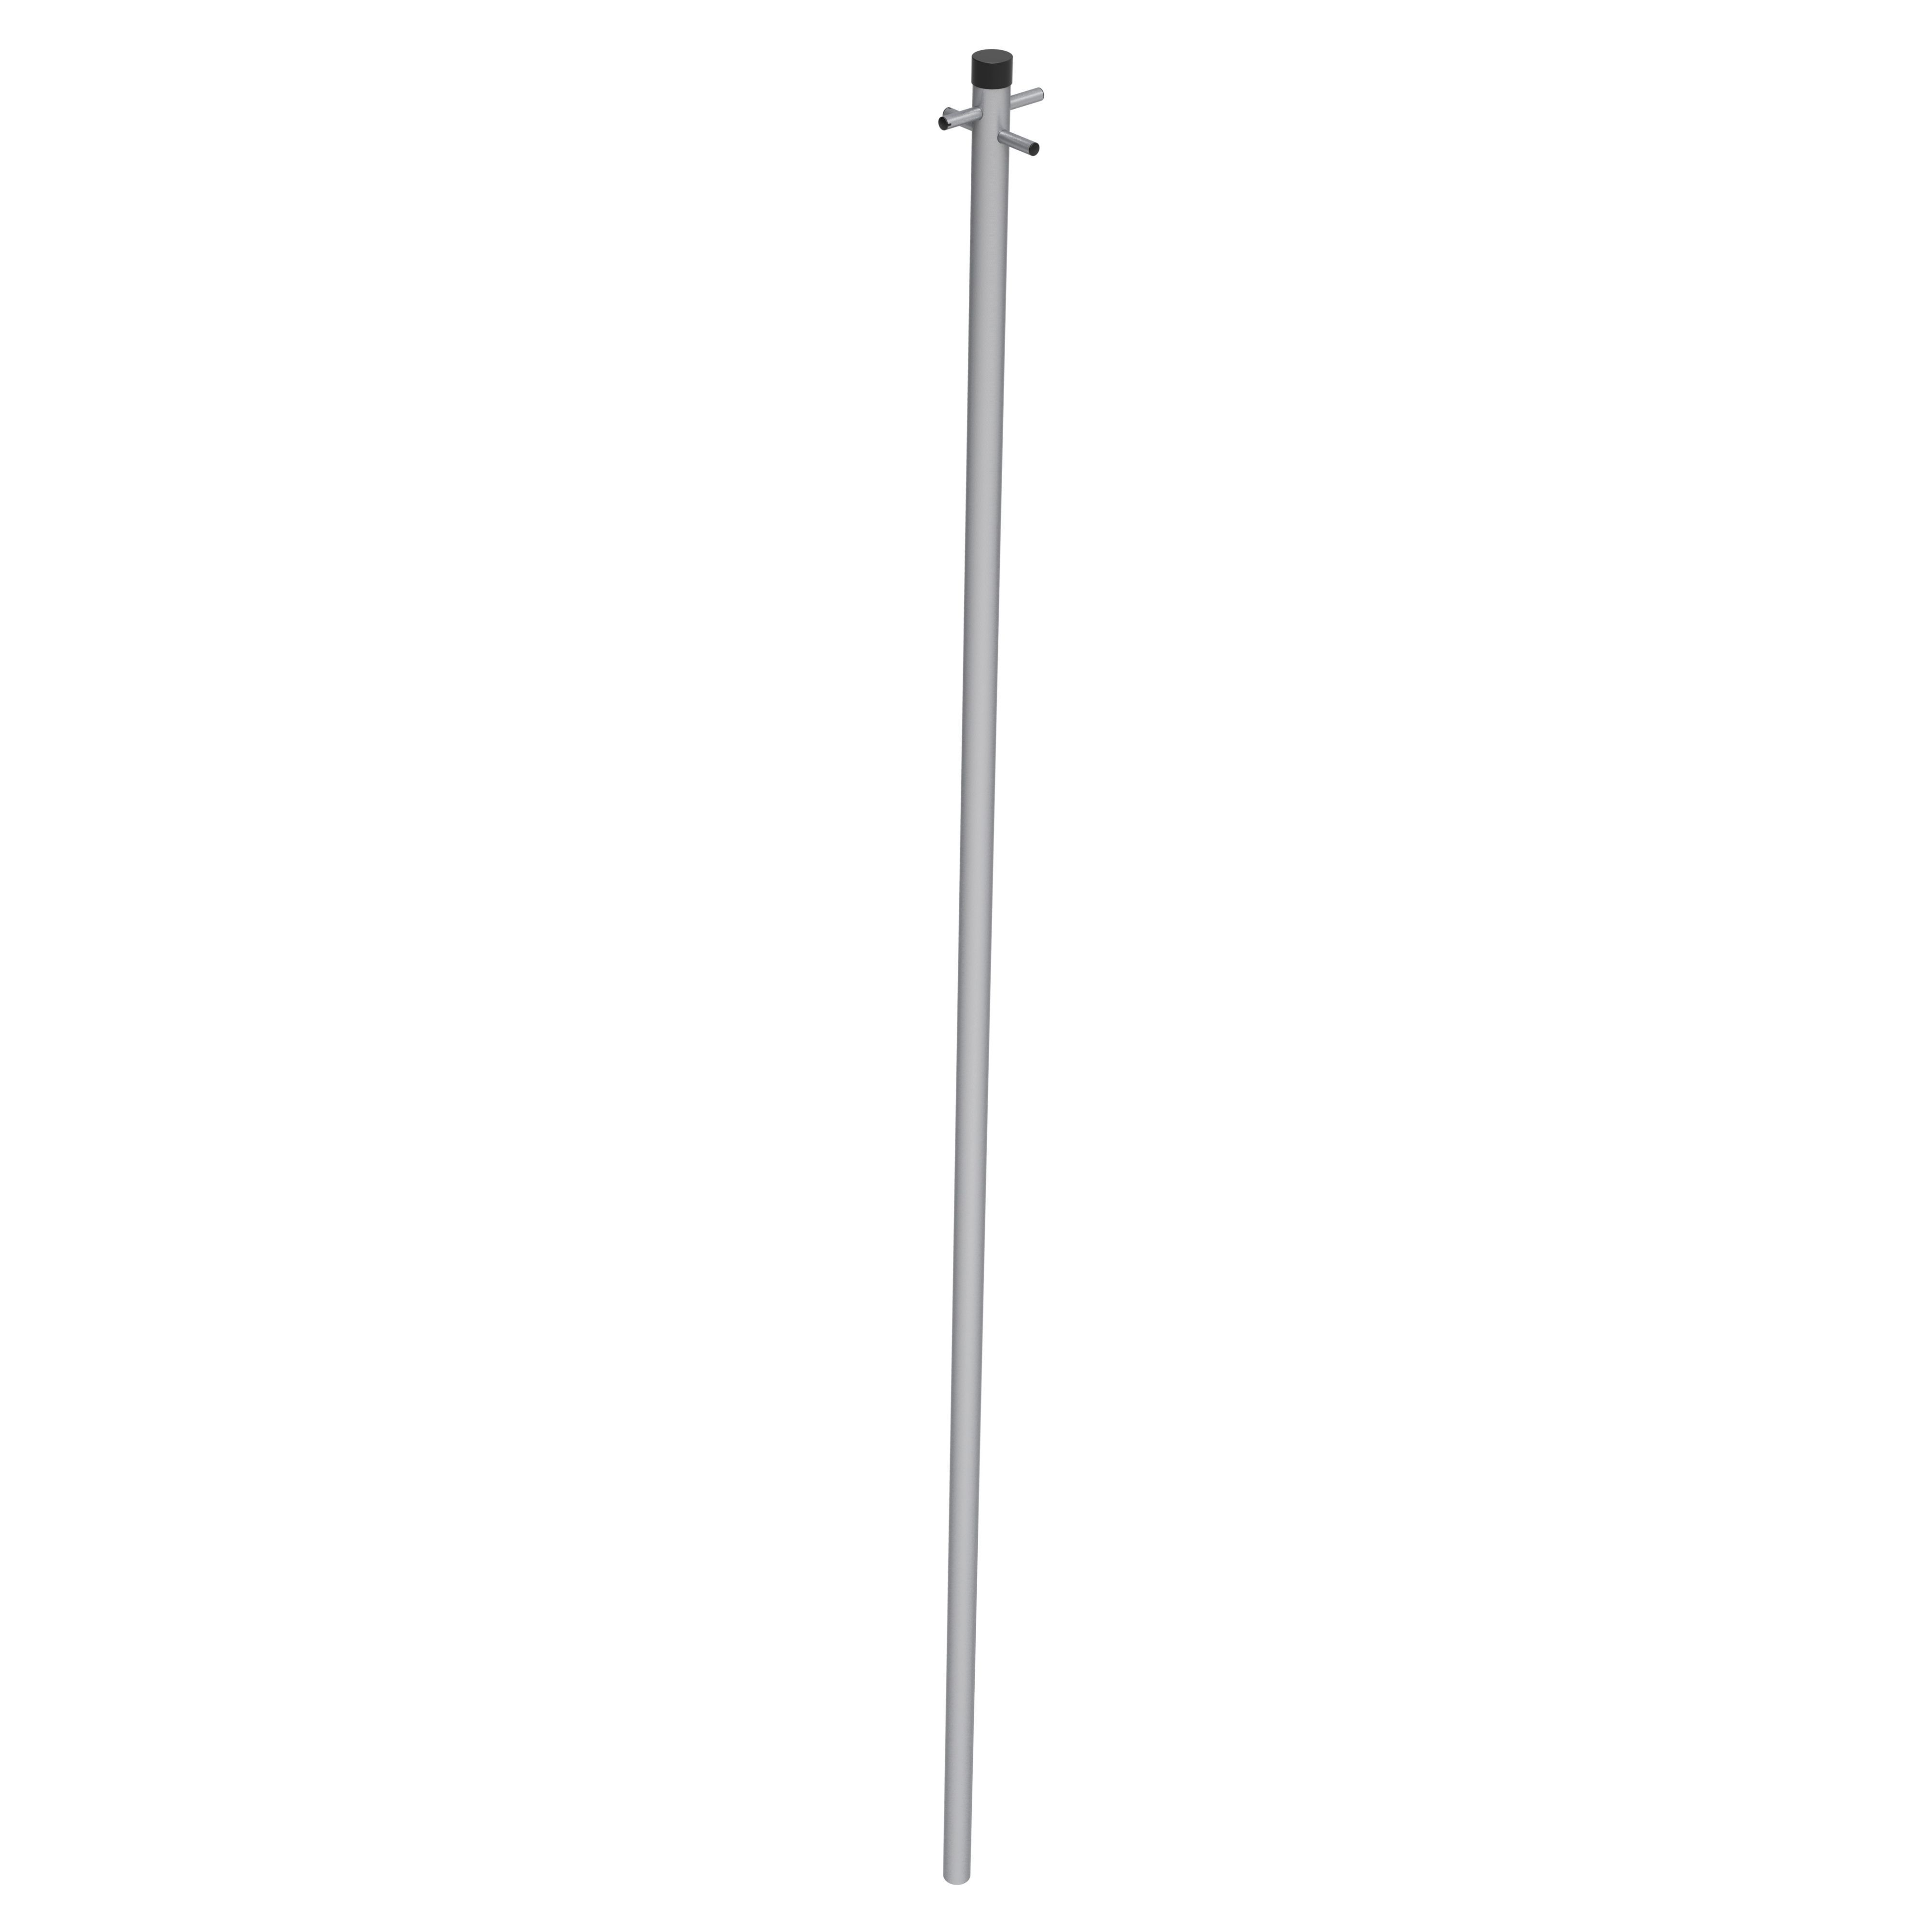 RotaSpin Extendable Washing Line Prop - 2.4m